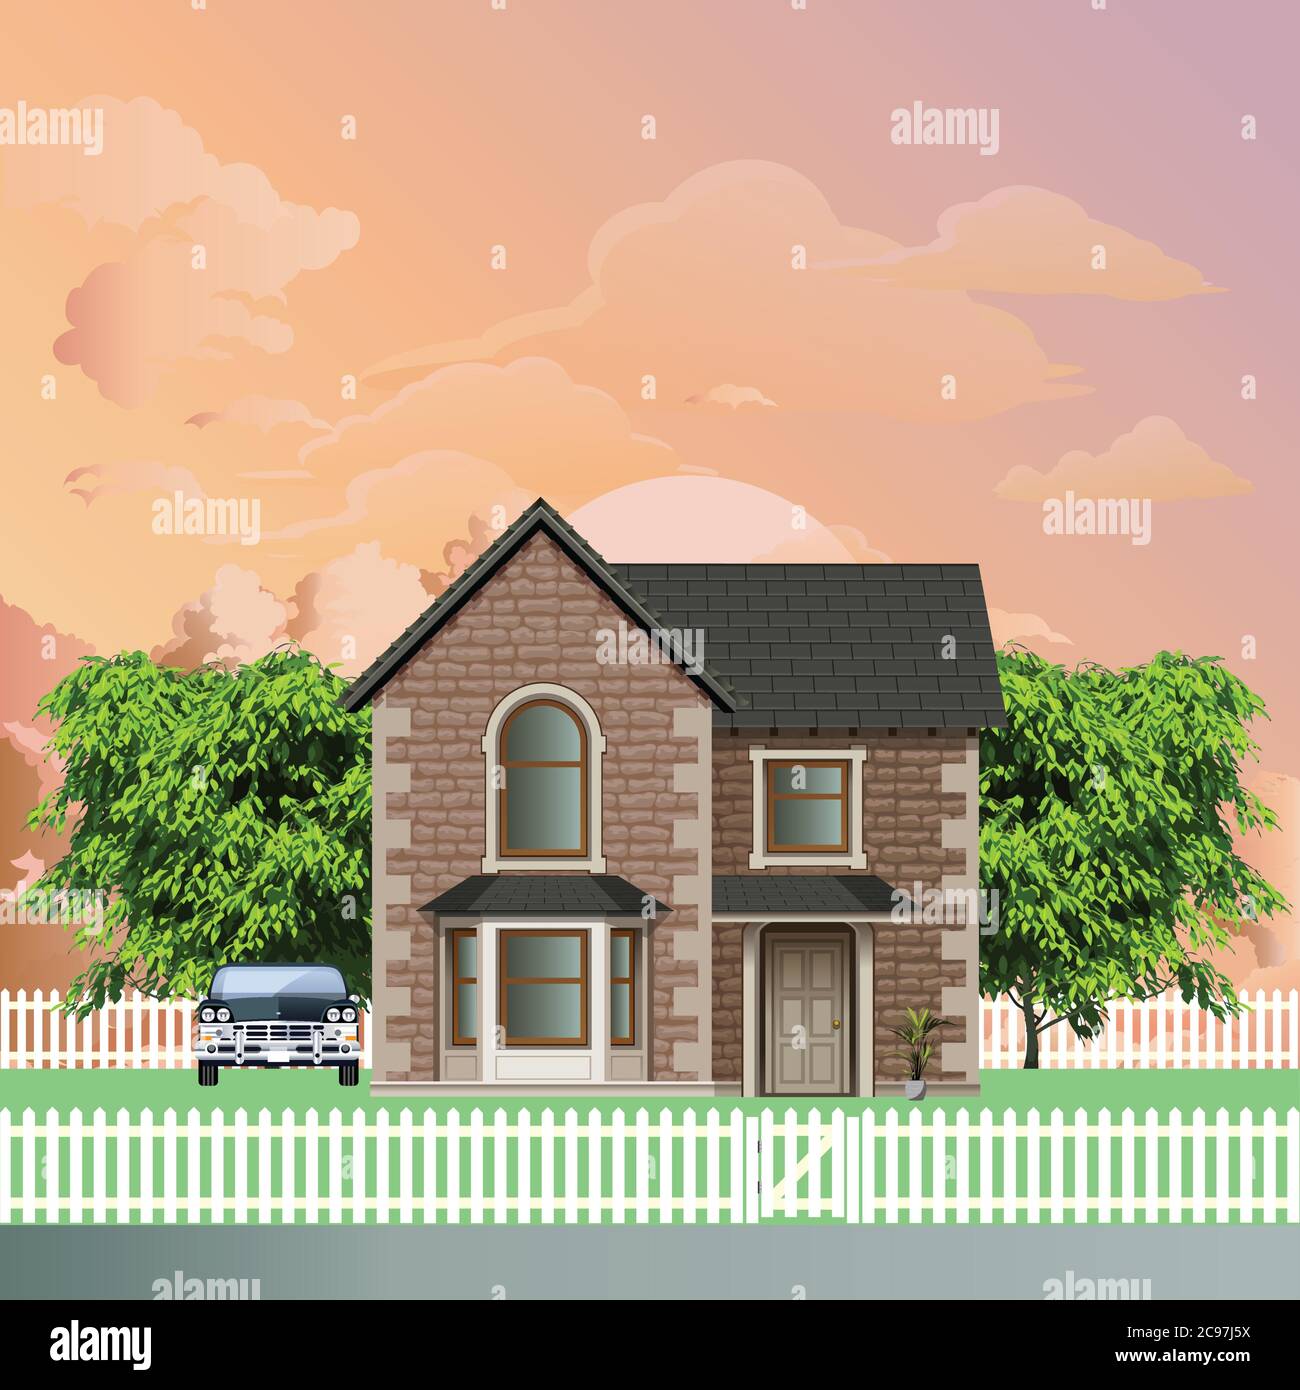 Detached residential house on a suburb street with white picket fence and gate set against a dawn or dusk sky Stock Vector